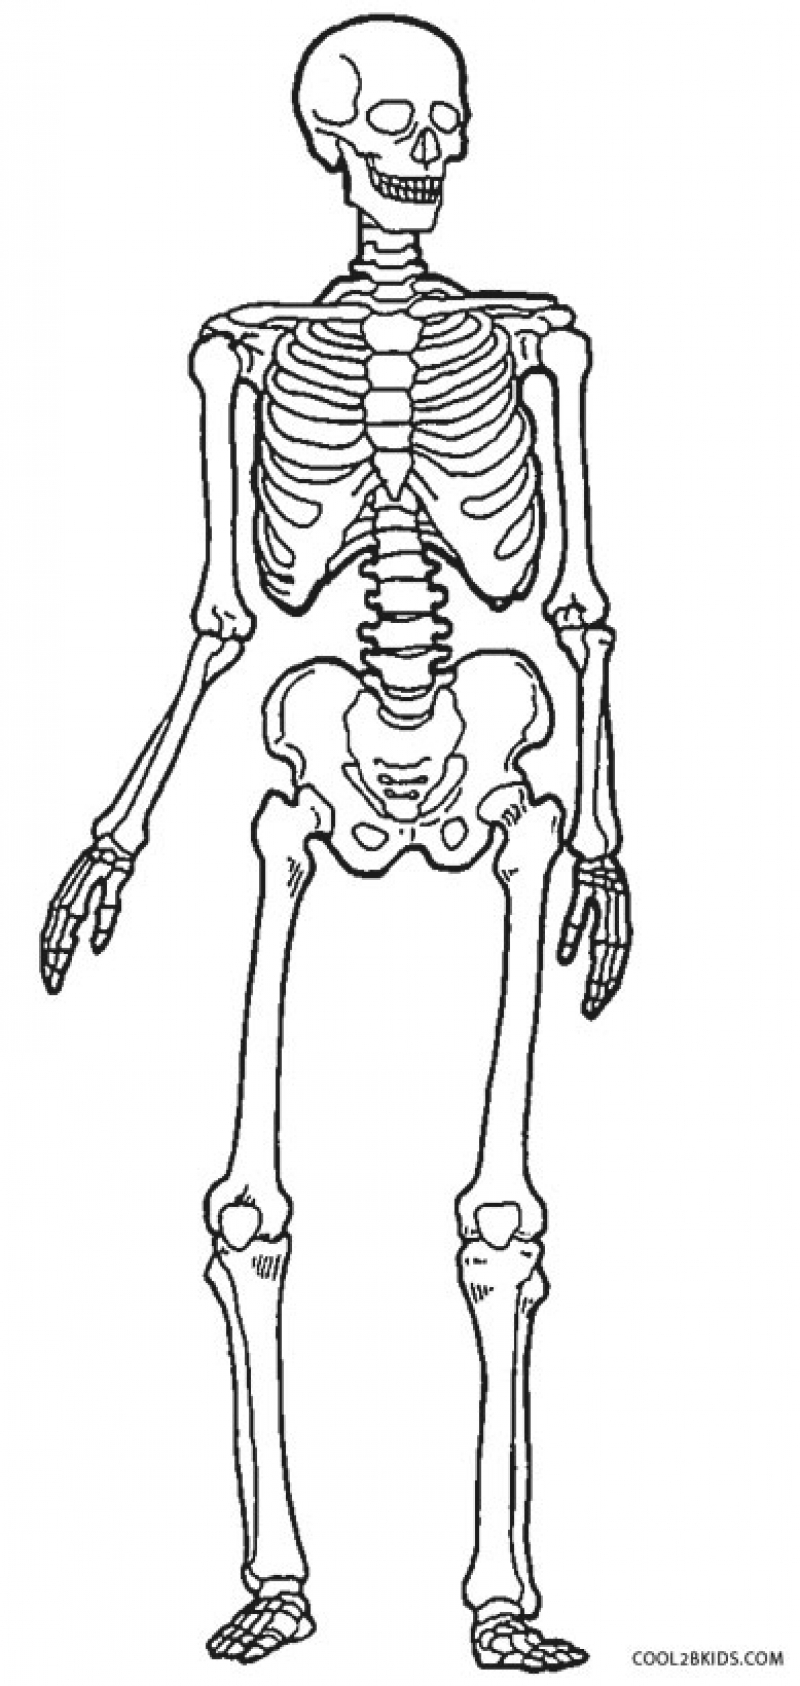 Download Anatomy Skeleton Drawing at GetDrawings.com | Free for ...